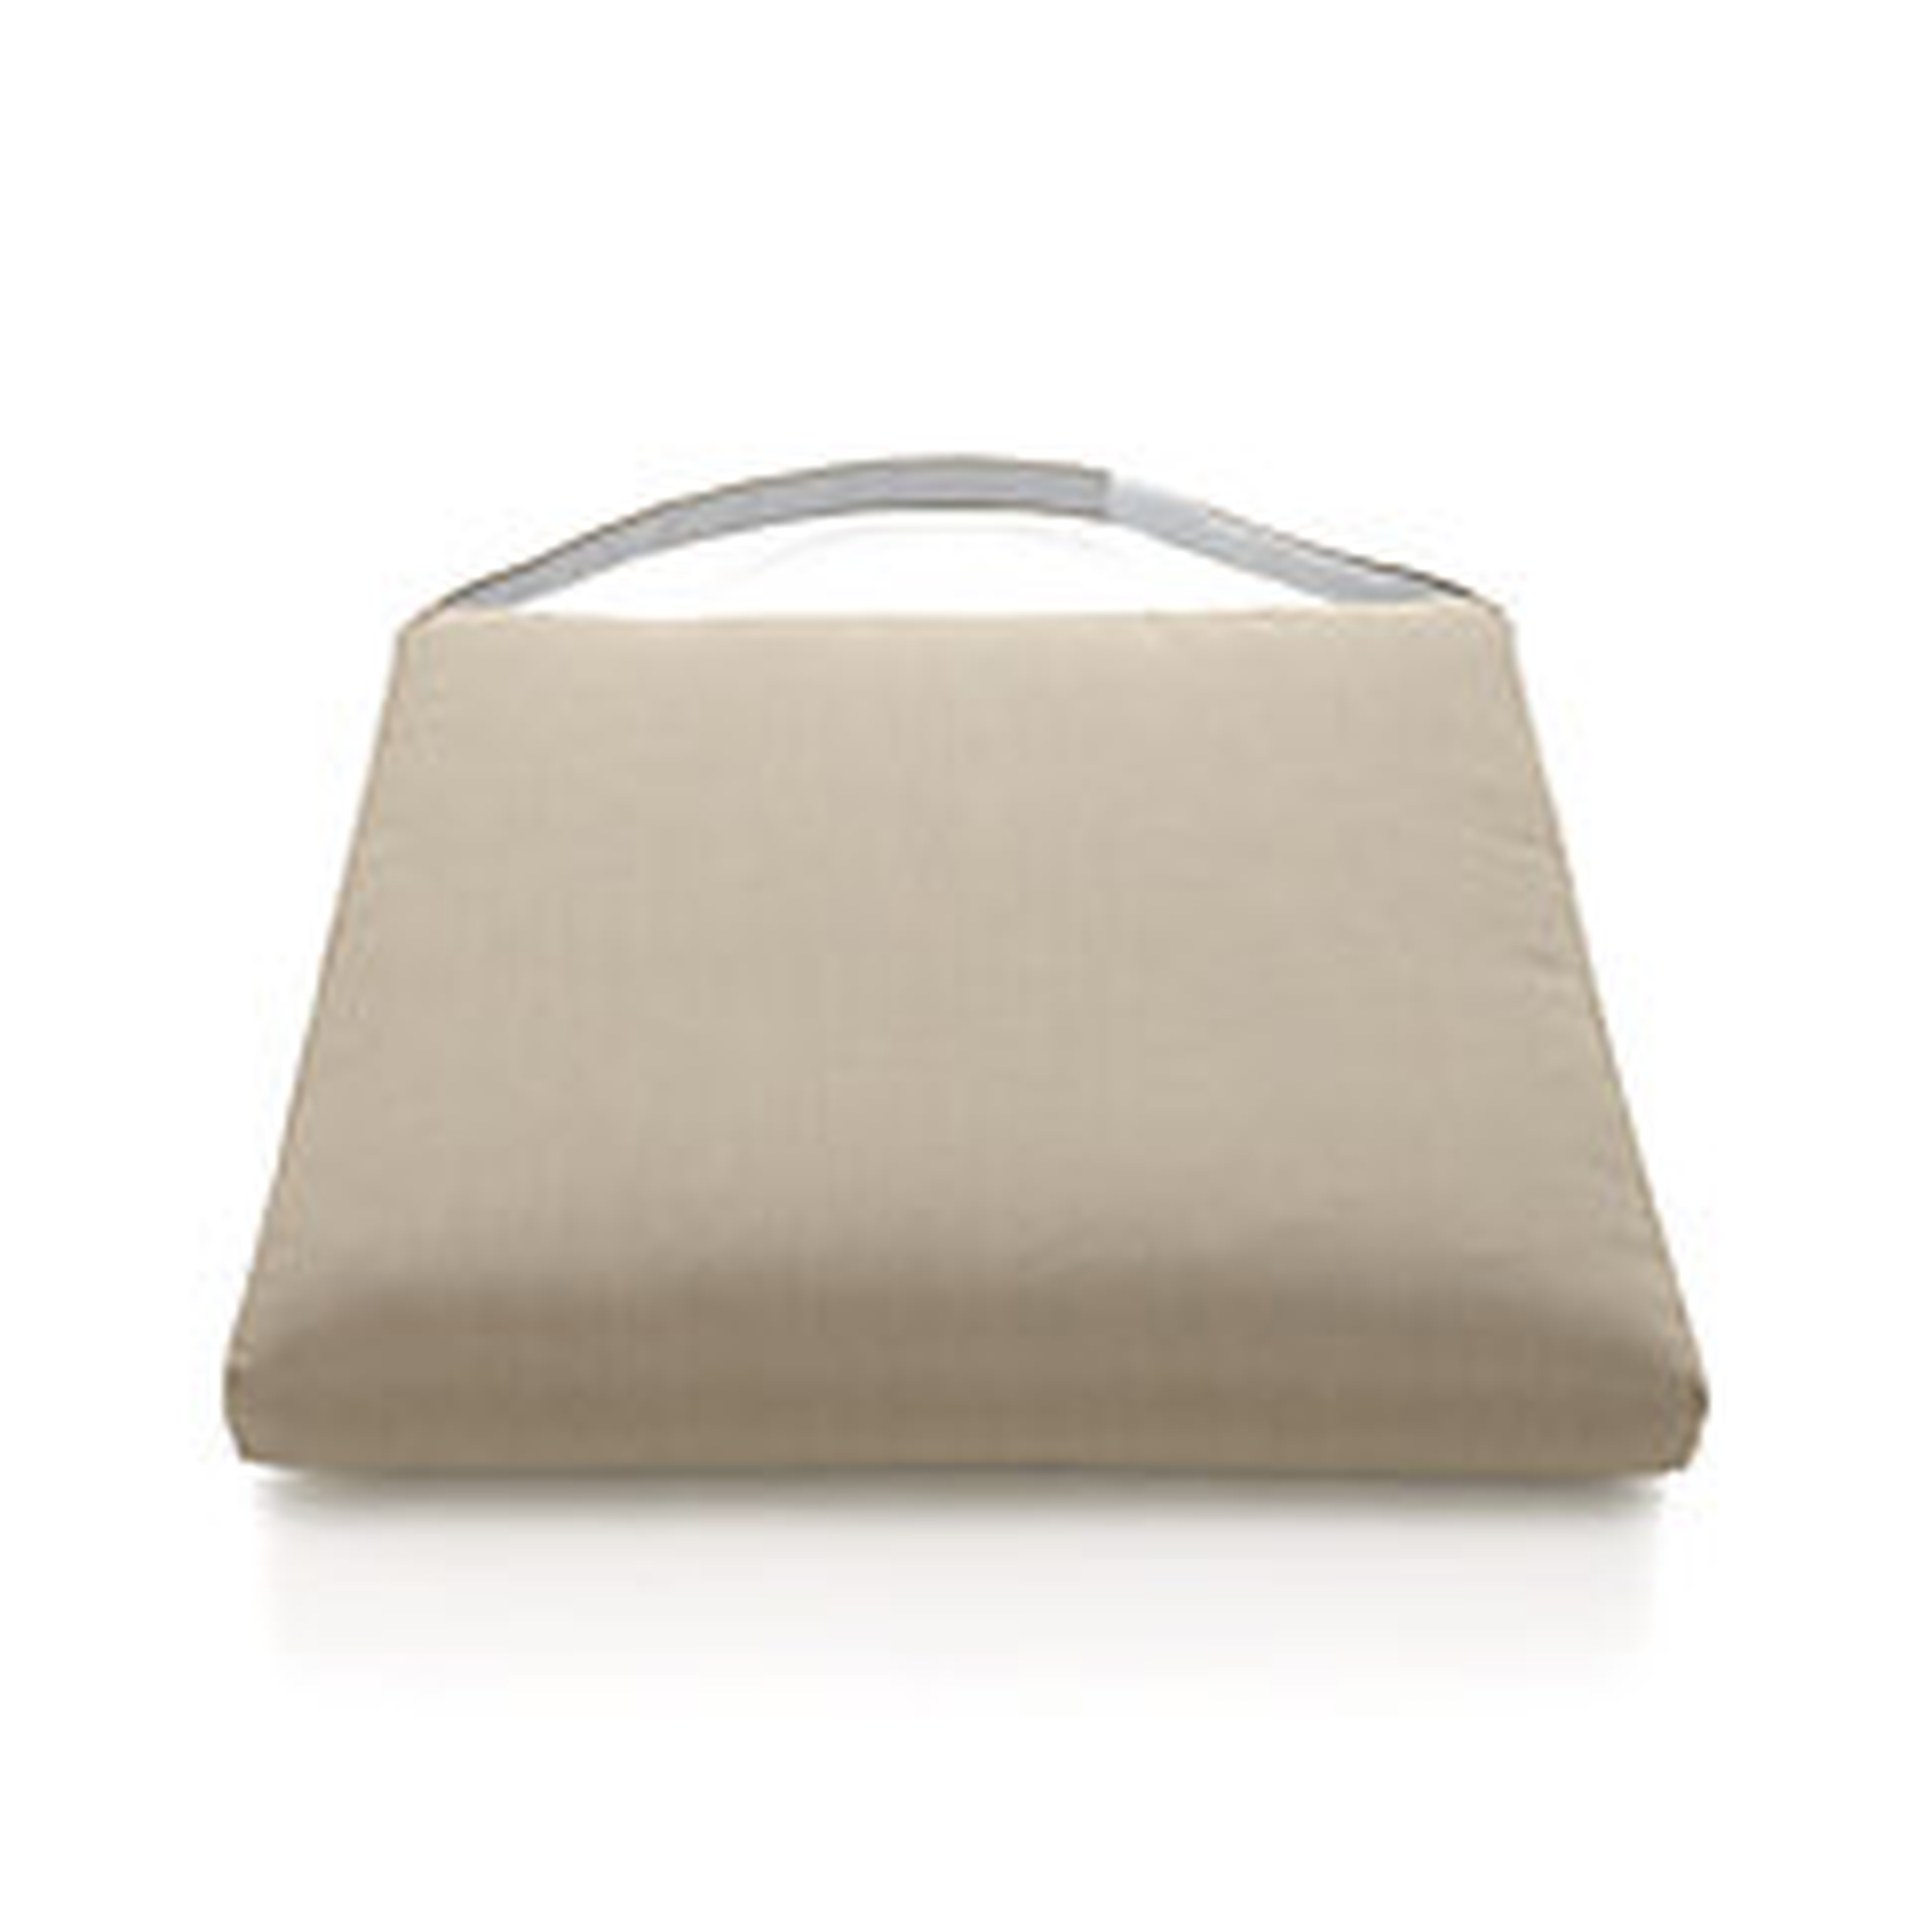 Captiva Stone Side Chair Cushion - Crate and Barrel